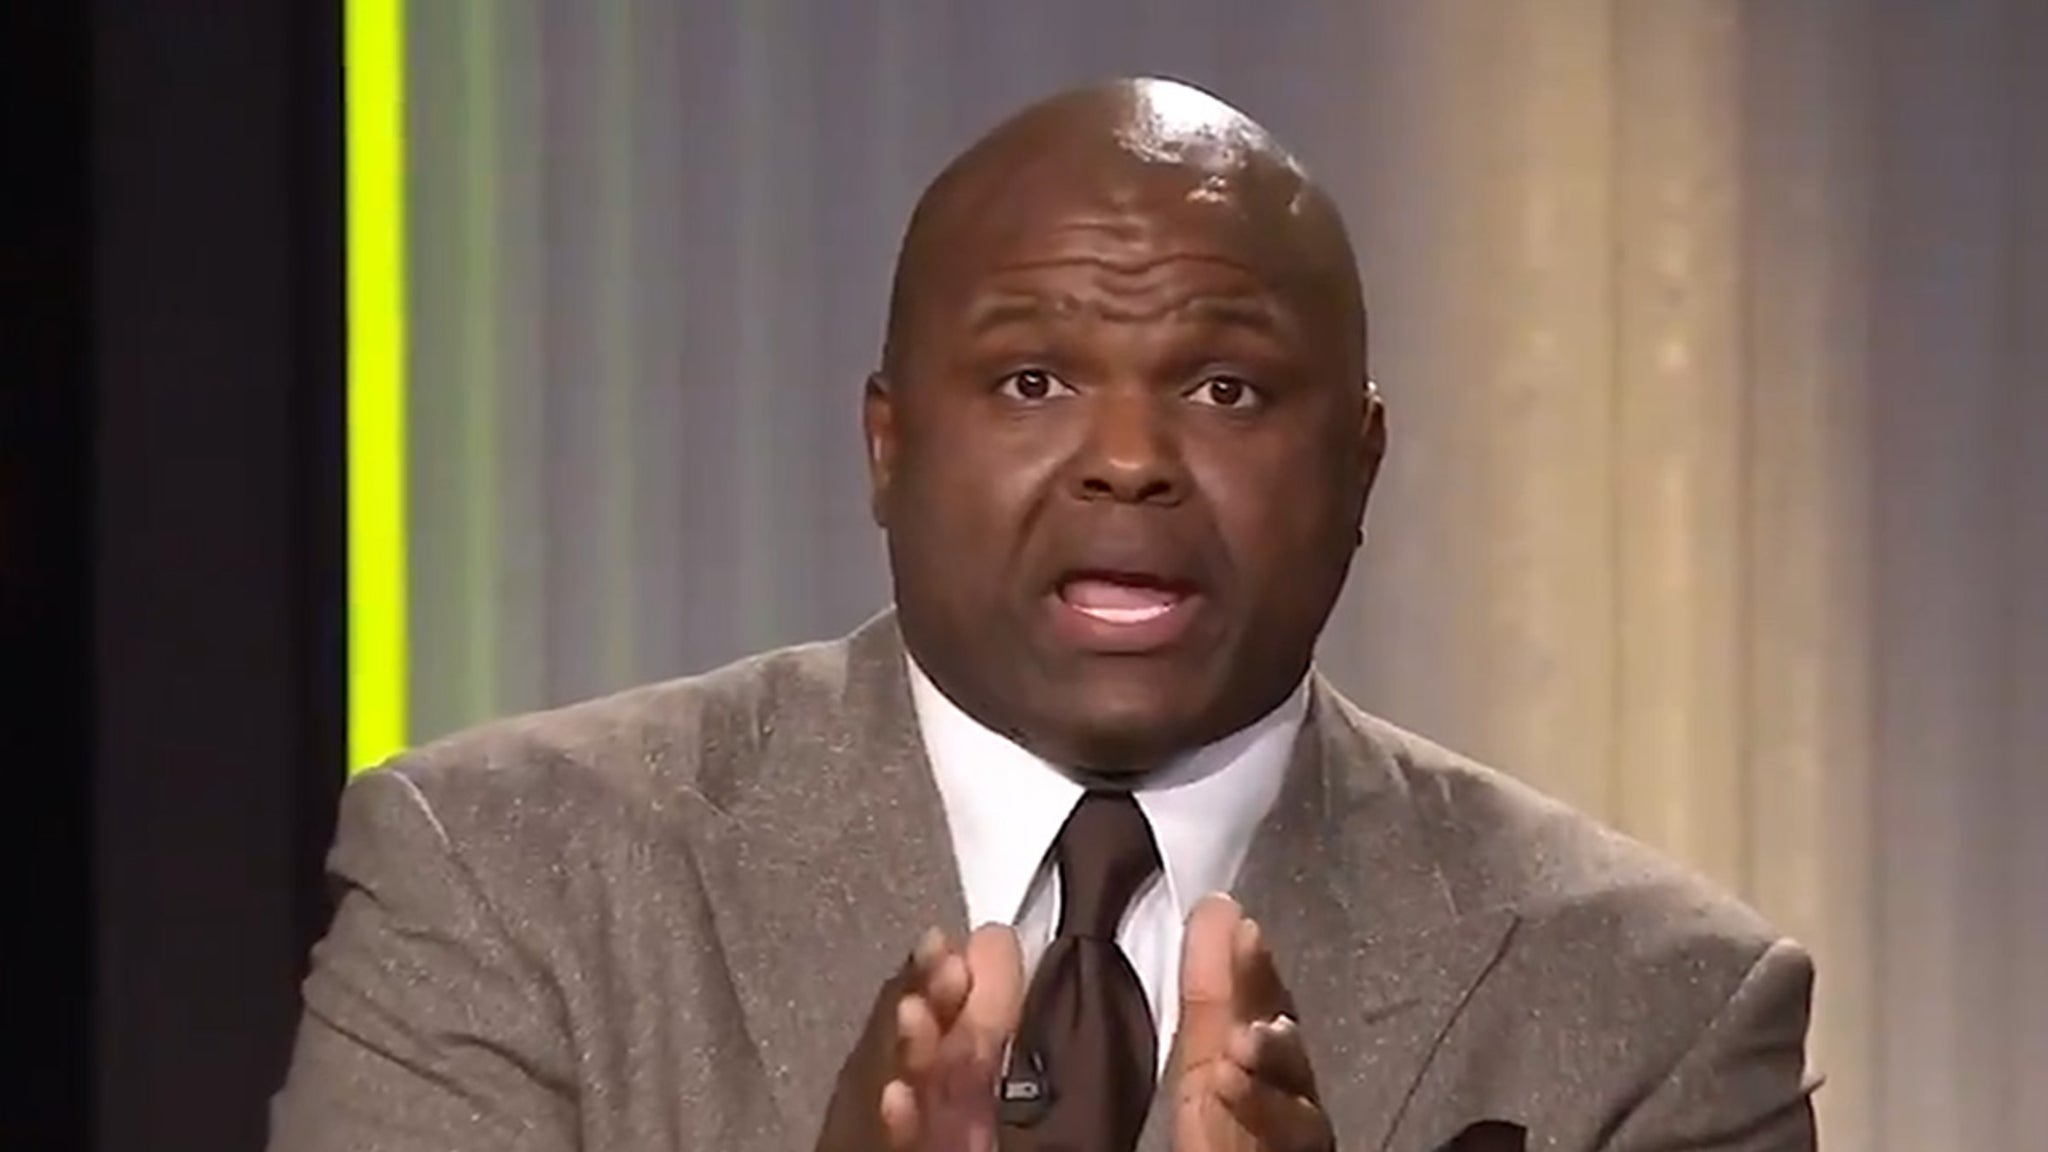 ESPN’s Booger McFarland calls out black NFL stars for brand focus, not the game